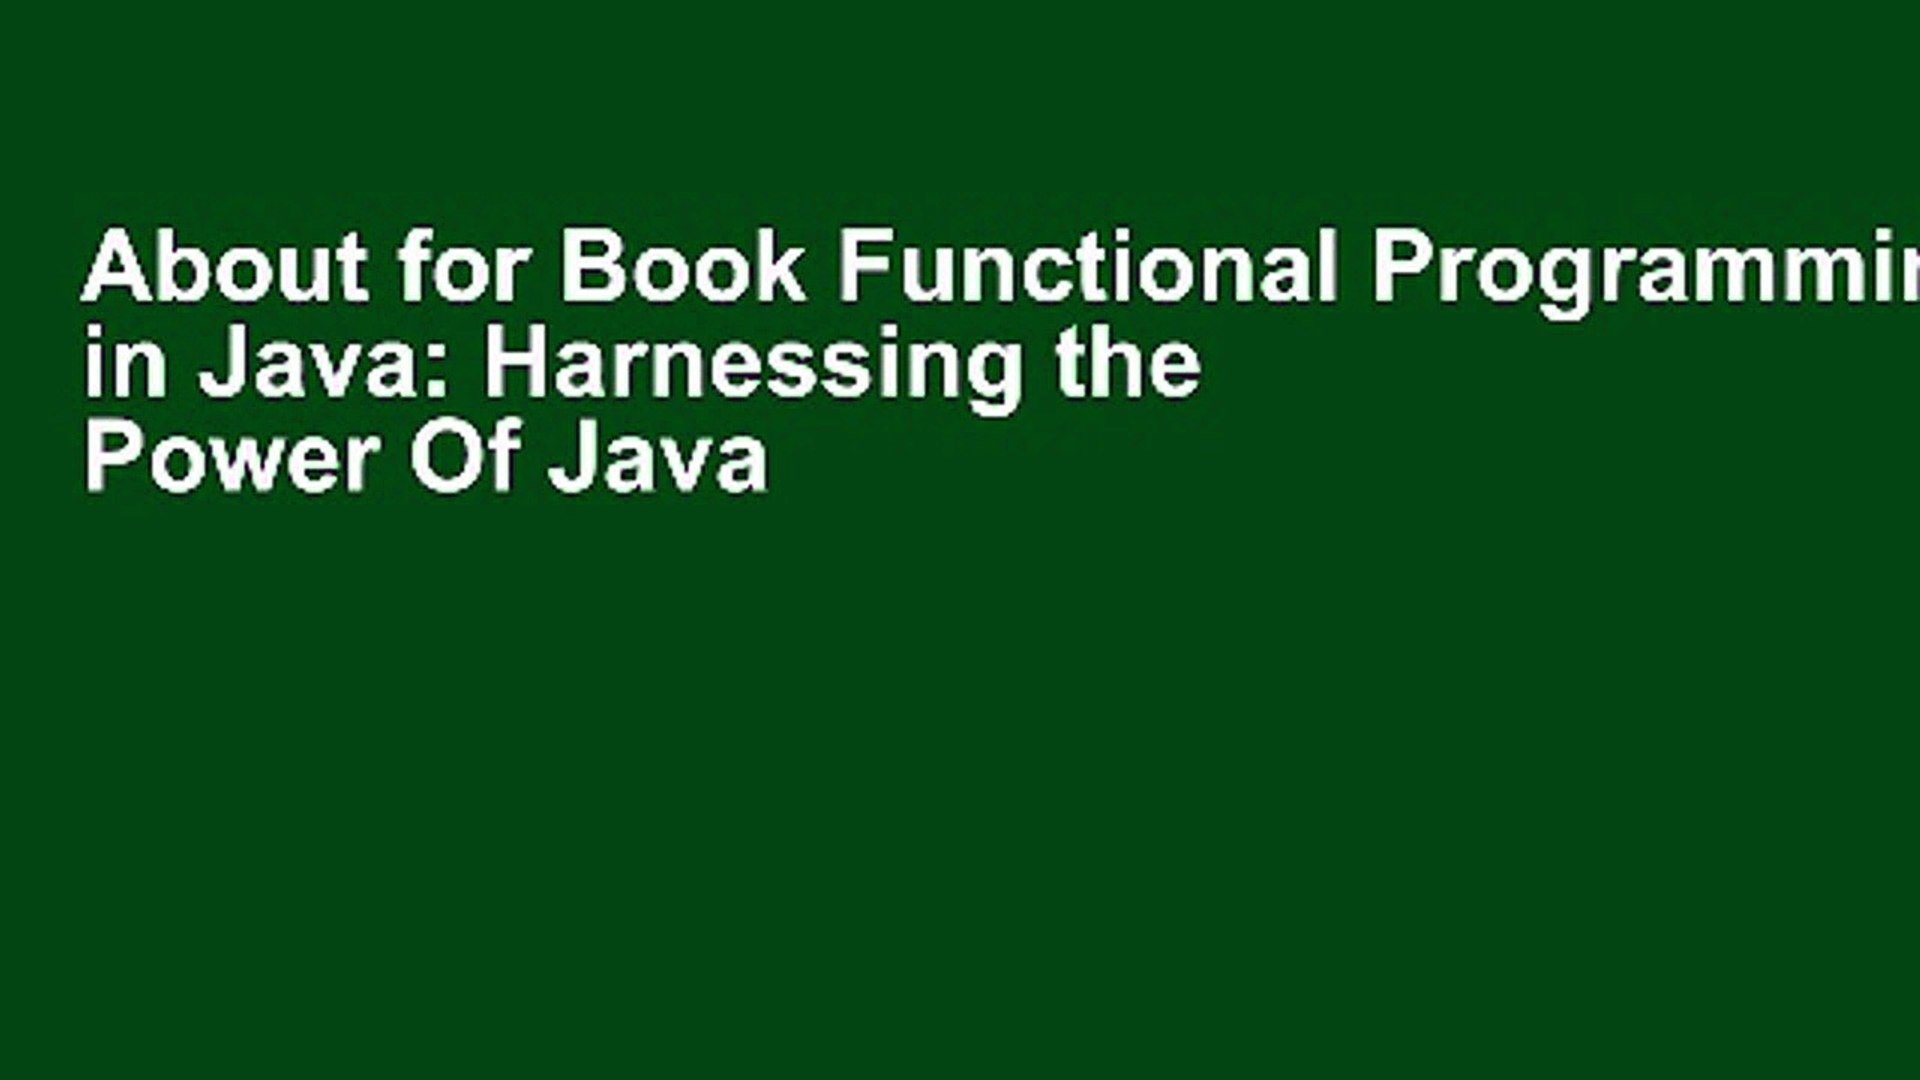 About for Book Functional Programming in Java: Harnessing the Power Of Java 8 Lambda Expressions